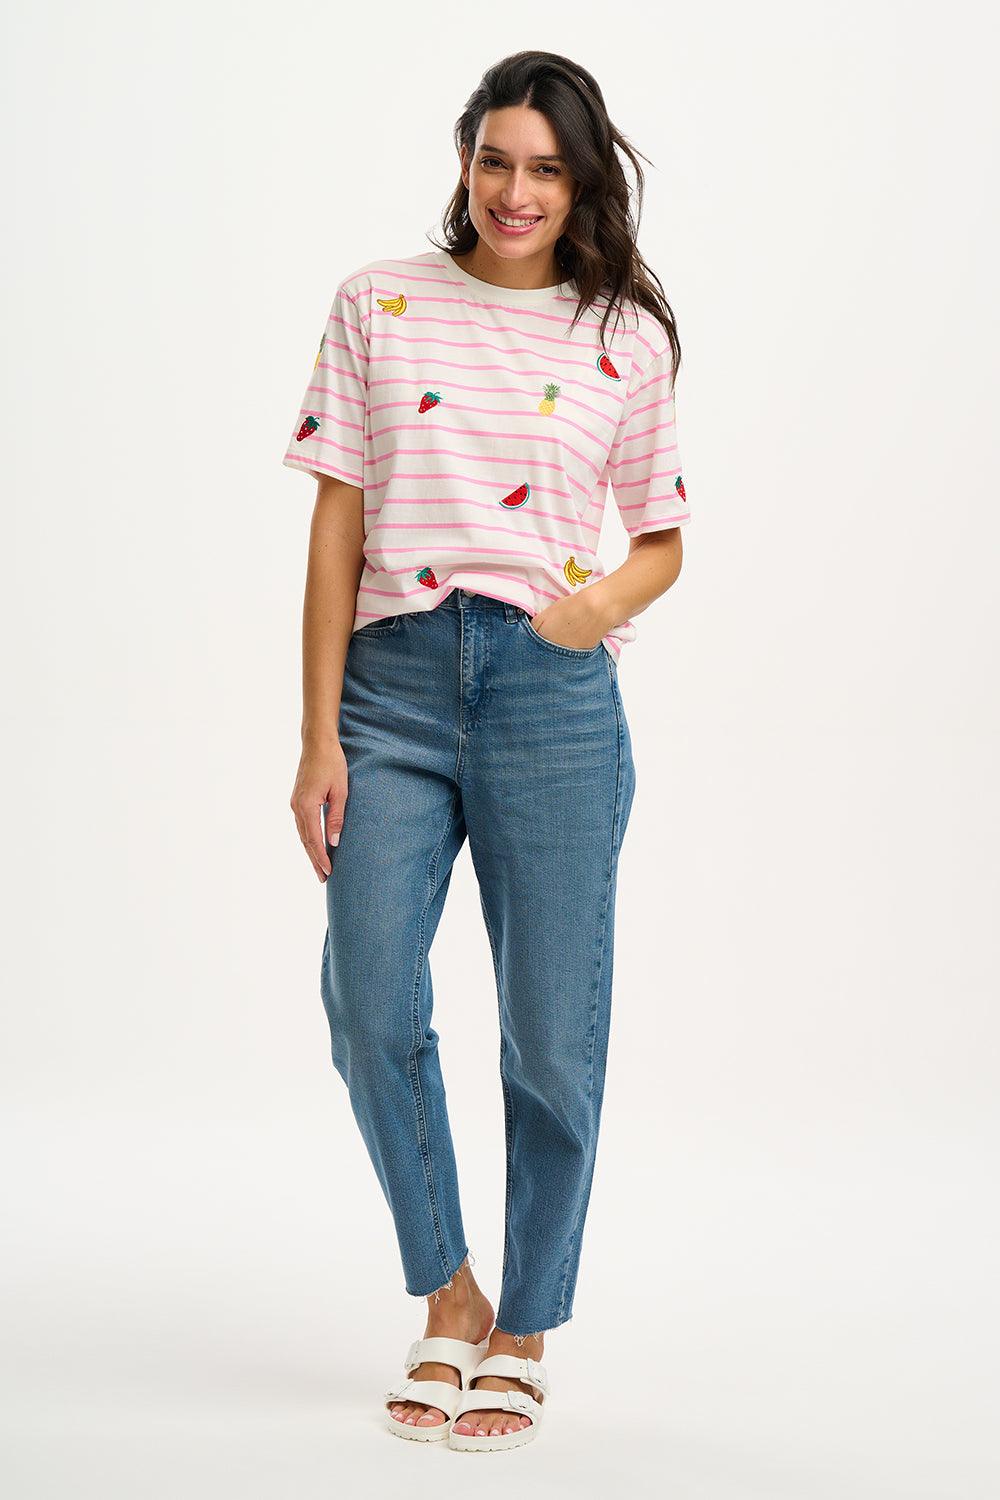 Camiseta Sugarhill Kinsley Relaxed Off-White Pink Fruit Embroidery - ECRU